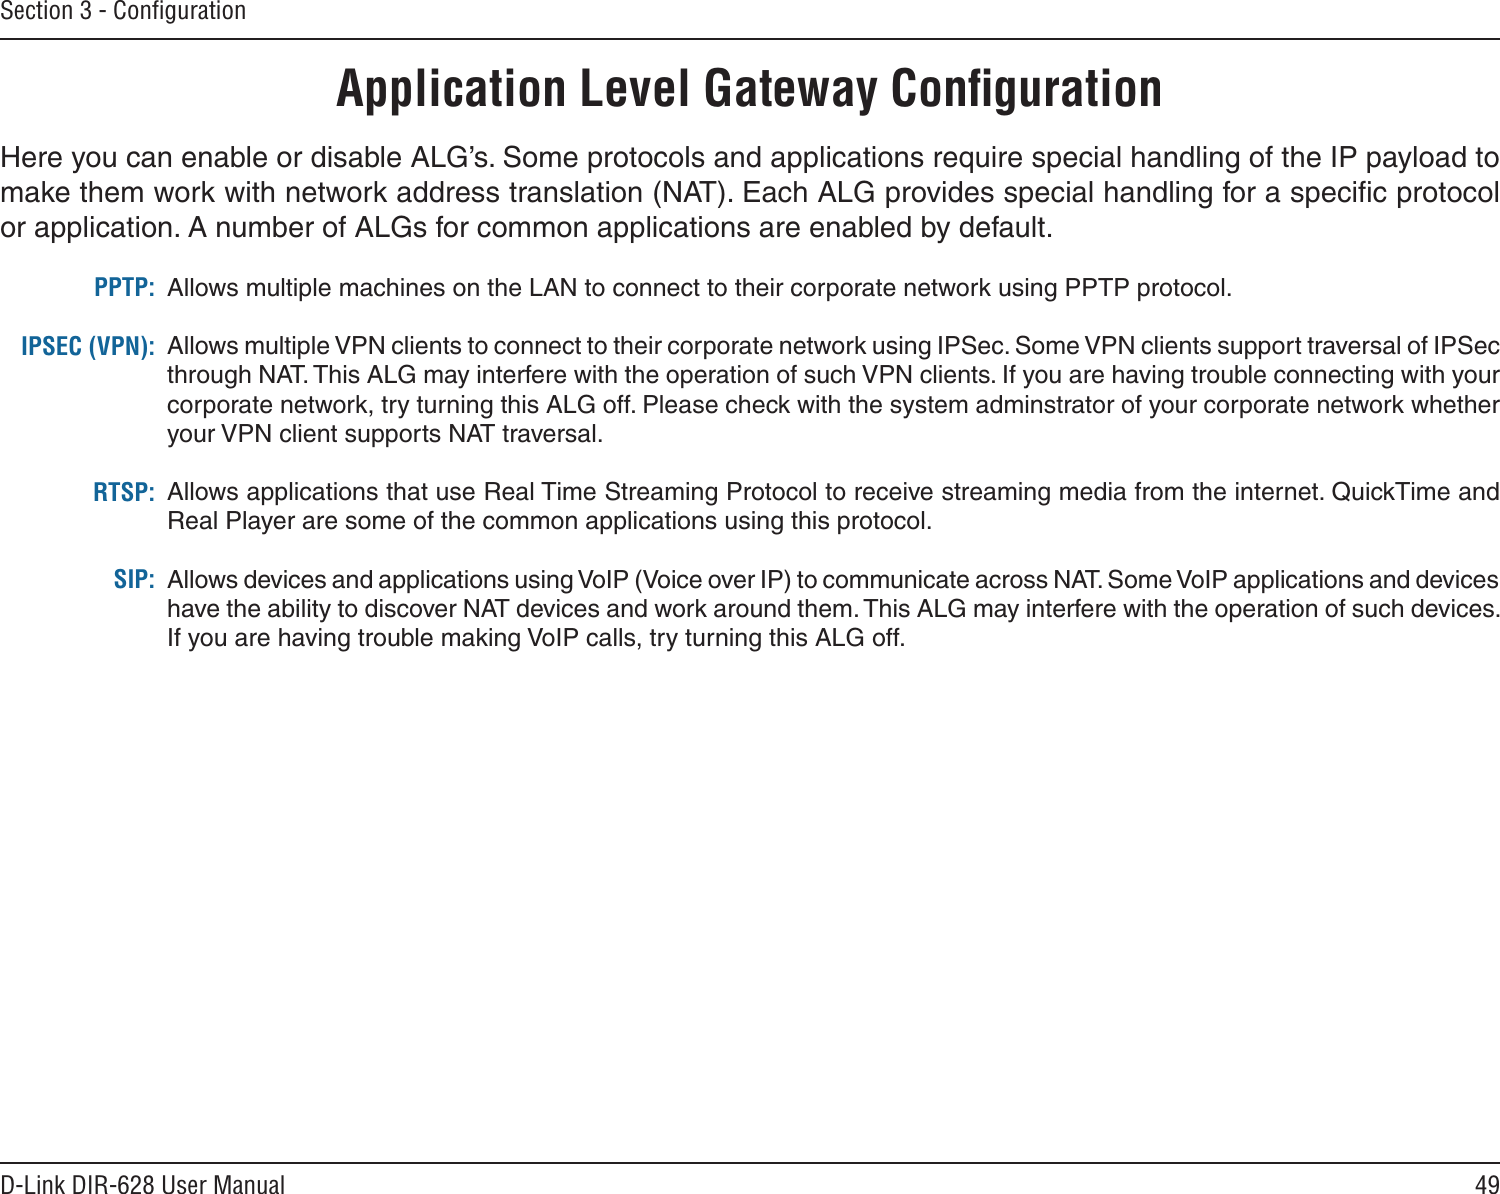 49D-Link DIR-628 User ManualSection 3 - ConﬁgurationApplication Level Gateway ConﬁgurationHere you can enable or disable ALG’s. Some protocols and applications require special handling of the IP payload to make them work with network address translation (NAT). Each ALG provides special handling for a speciﬁc protocol or application. A number of ALGs for common applications are enabled by default.Allows multiple machines on the LAN to connect to their corporate network using PPTP protocol. Allows multiple VPN clients to connect to their corporate network using IPSec. Some VPN clients support traversal of IPSec through NAT. This ALG may interfere with the operation of such VPN clients. If you are having trouble connecting with your corporate network, try turning this ALG off. Please check with the system adminstrator of your corporate network whether your VPN client supports NAT traversal.Allows applications that use Real Time Streaming Protocol to receive streaming media from the internet. QuickTime and Real Player are some of the common applications using this protocol. Allows devices and applications using VoIP (Voice over IP) to communicate across NAT. Some VoIP applications and devices have the ability to discover NAT devices and work around them. This ALG may interfere with the operation of such devices. If you are having trouble making VoIP calls, try turning this ALG off. PPTP:IPSEC (VPN):RTSP:SIP: